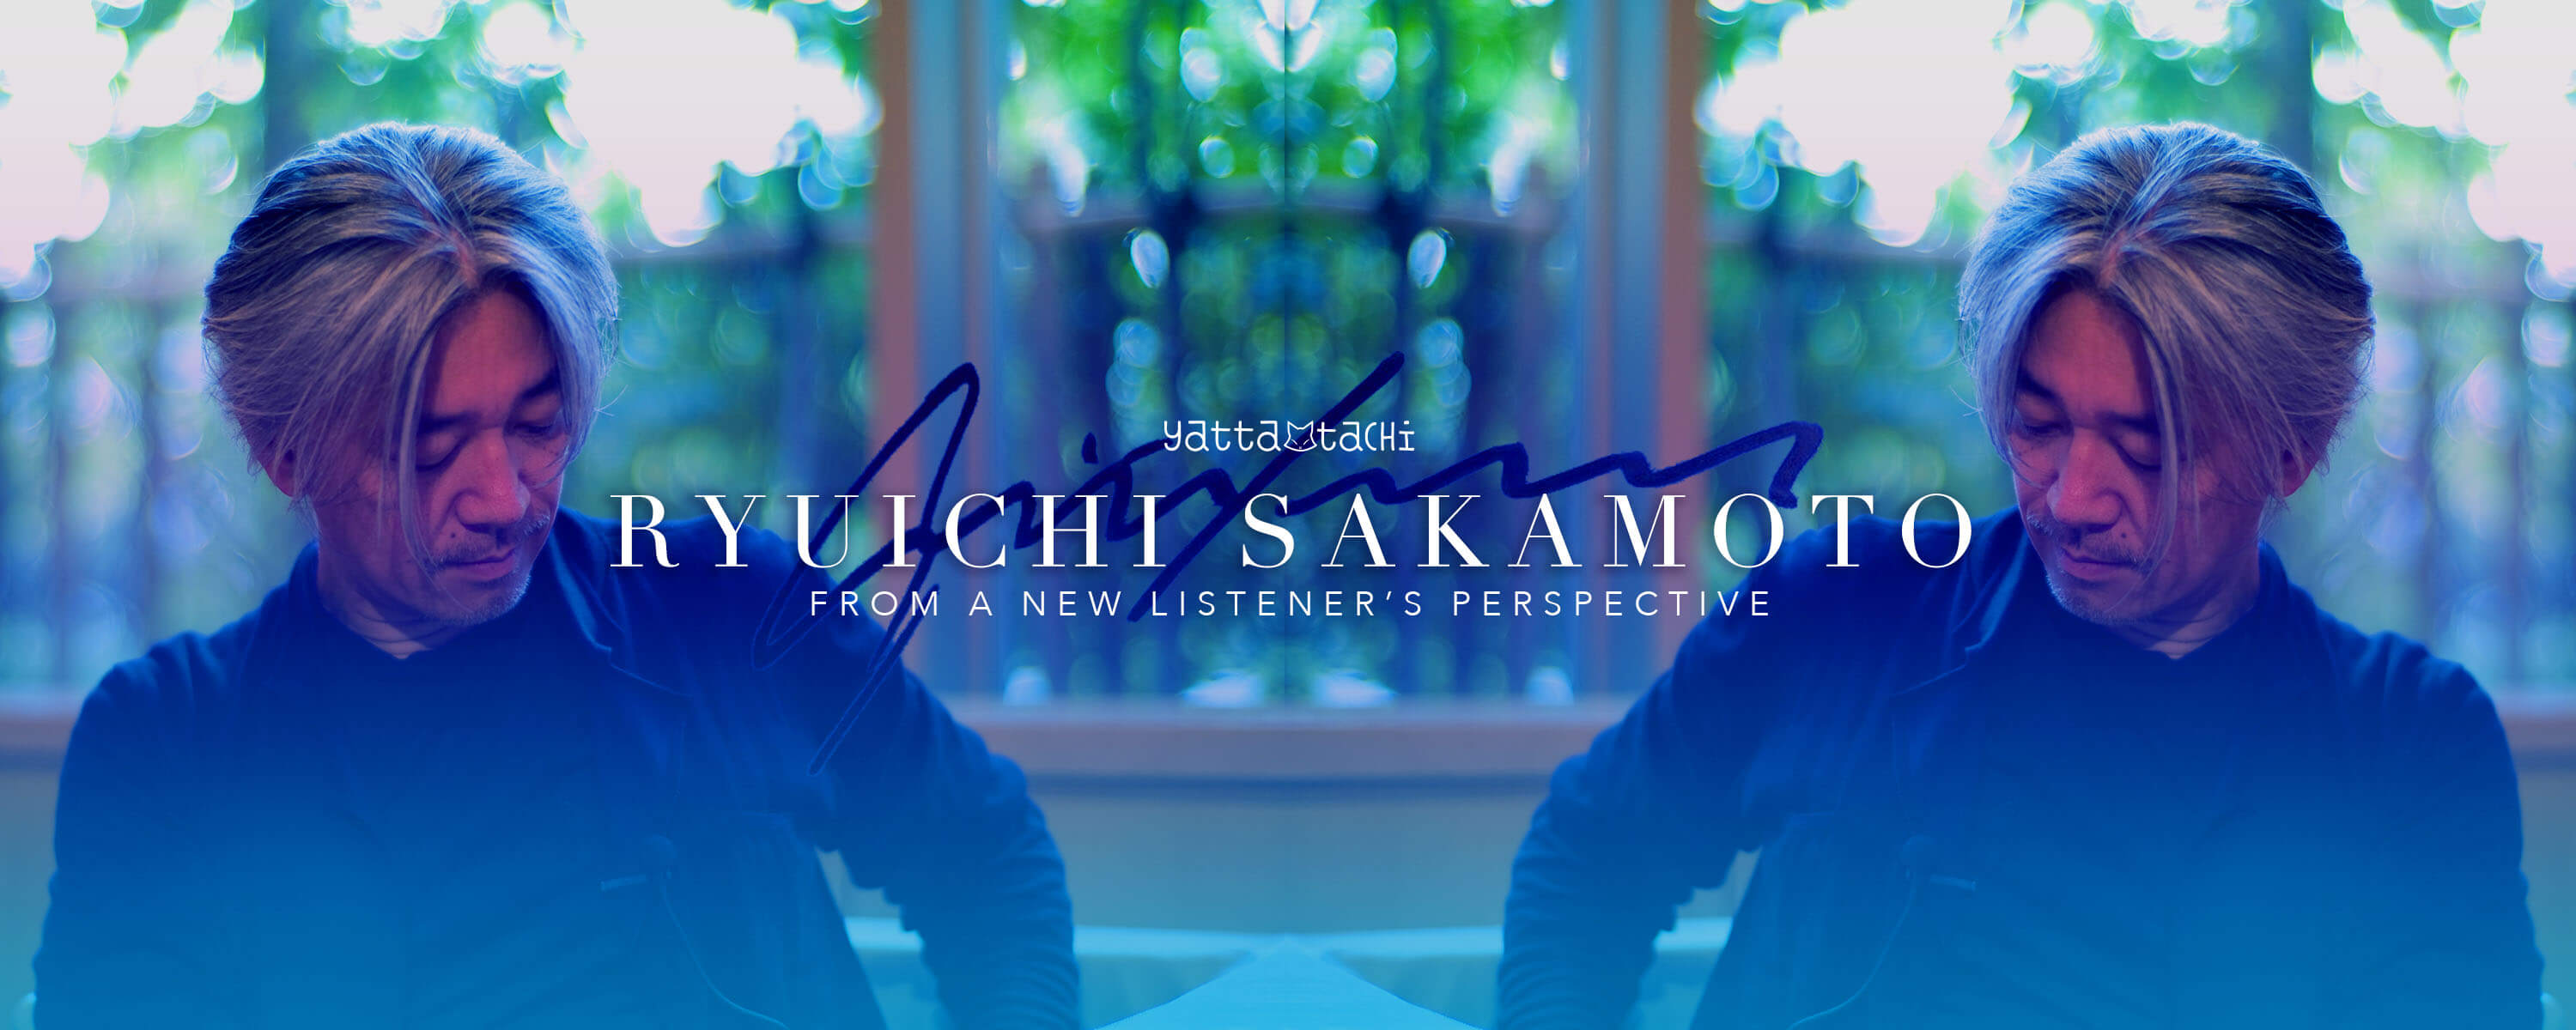 Ryuichi Sakamoto: From a New Listener's Perspective